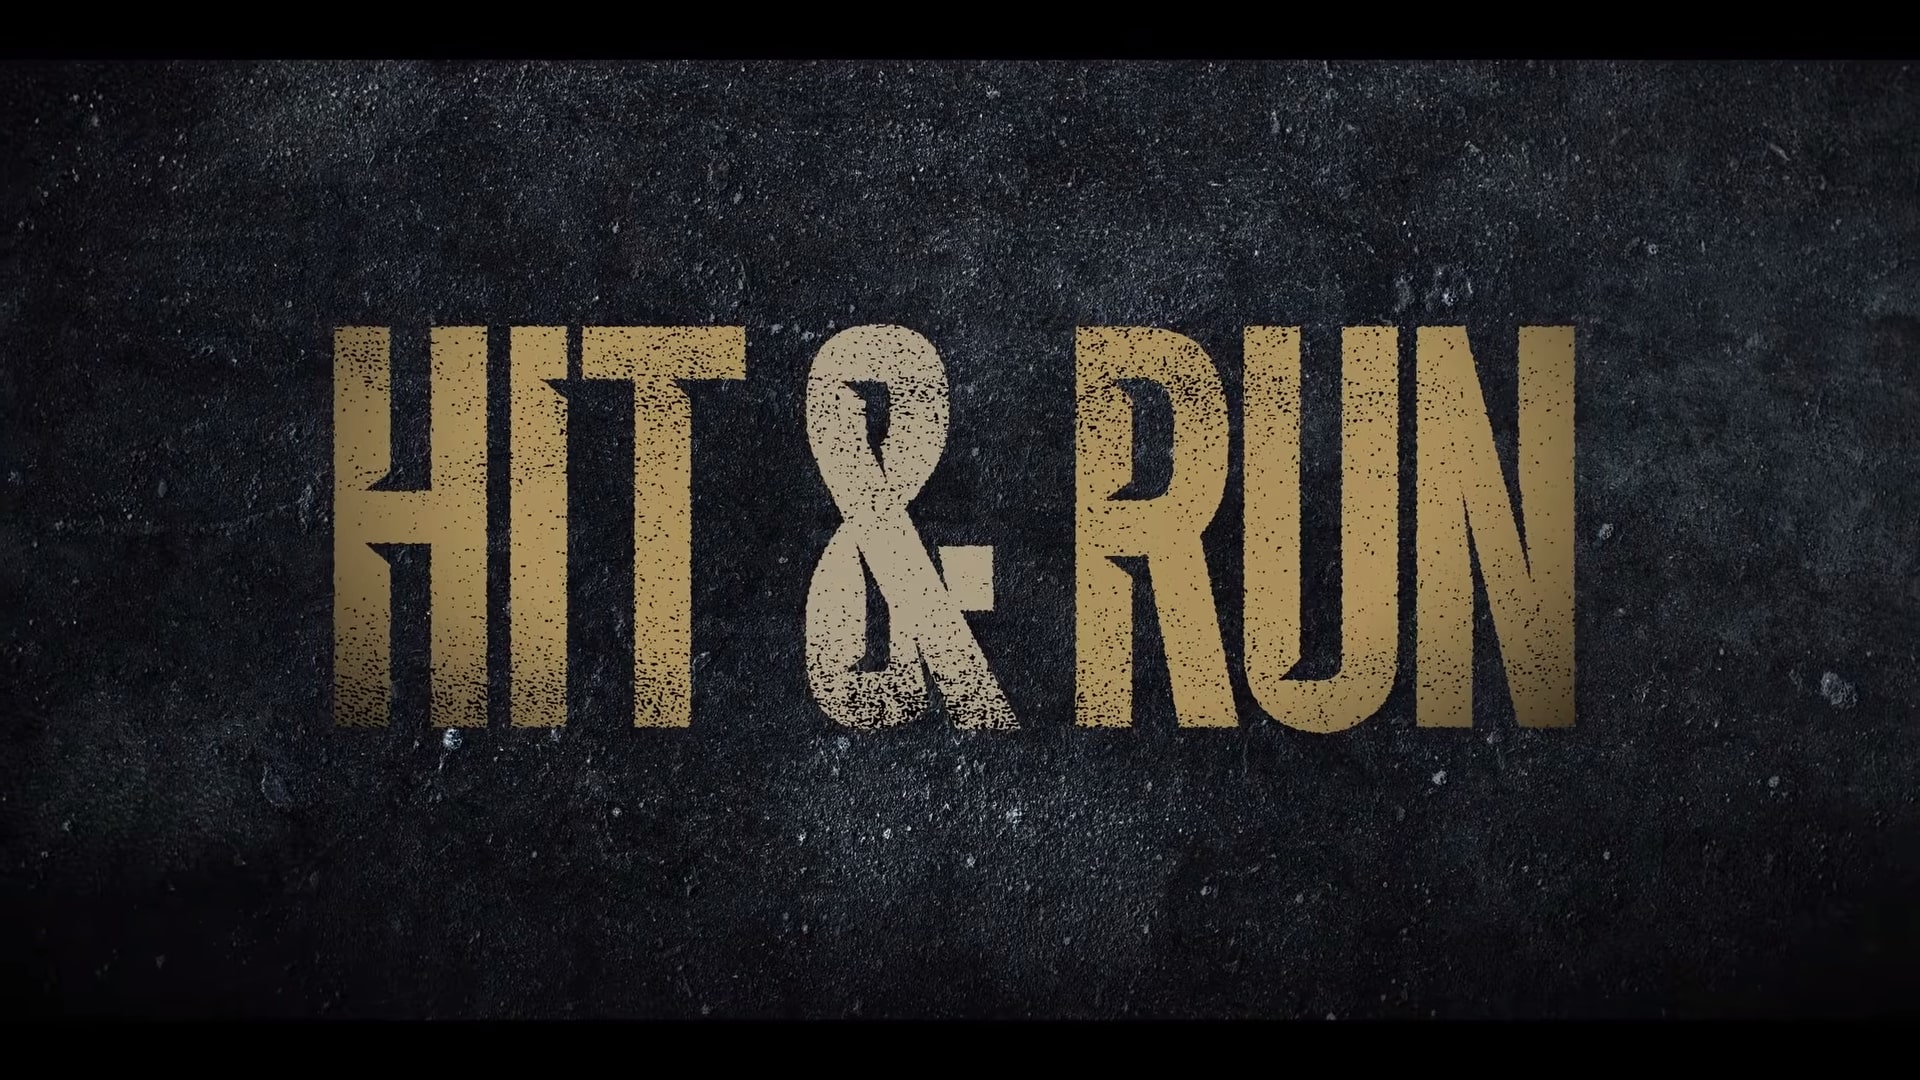 Netflix Hit and Run Trailer, Coming to Netflix in August 2021